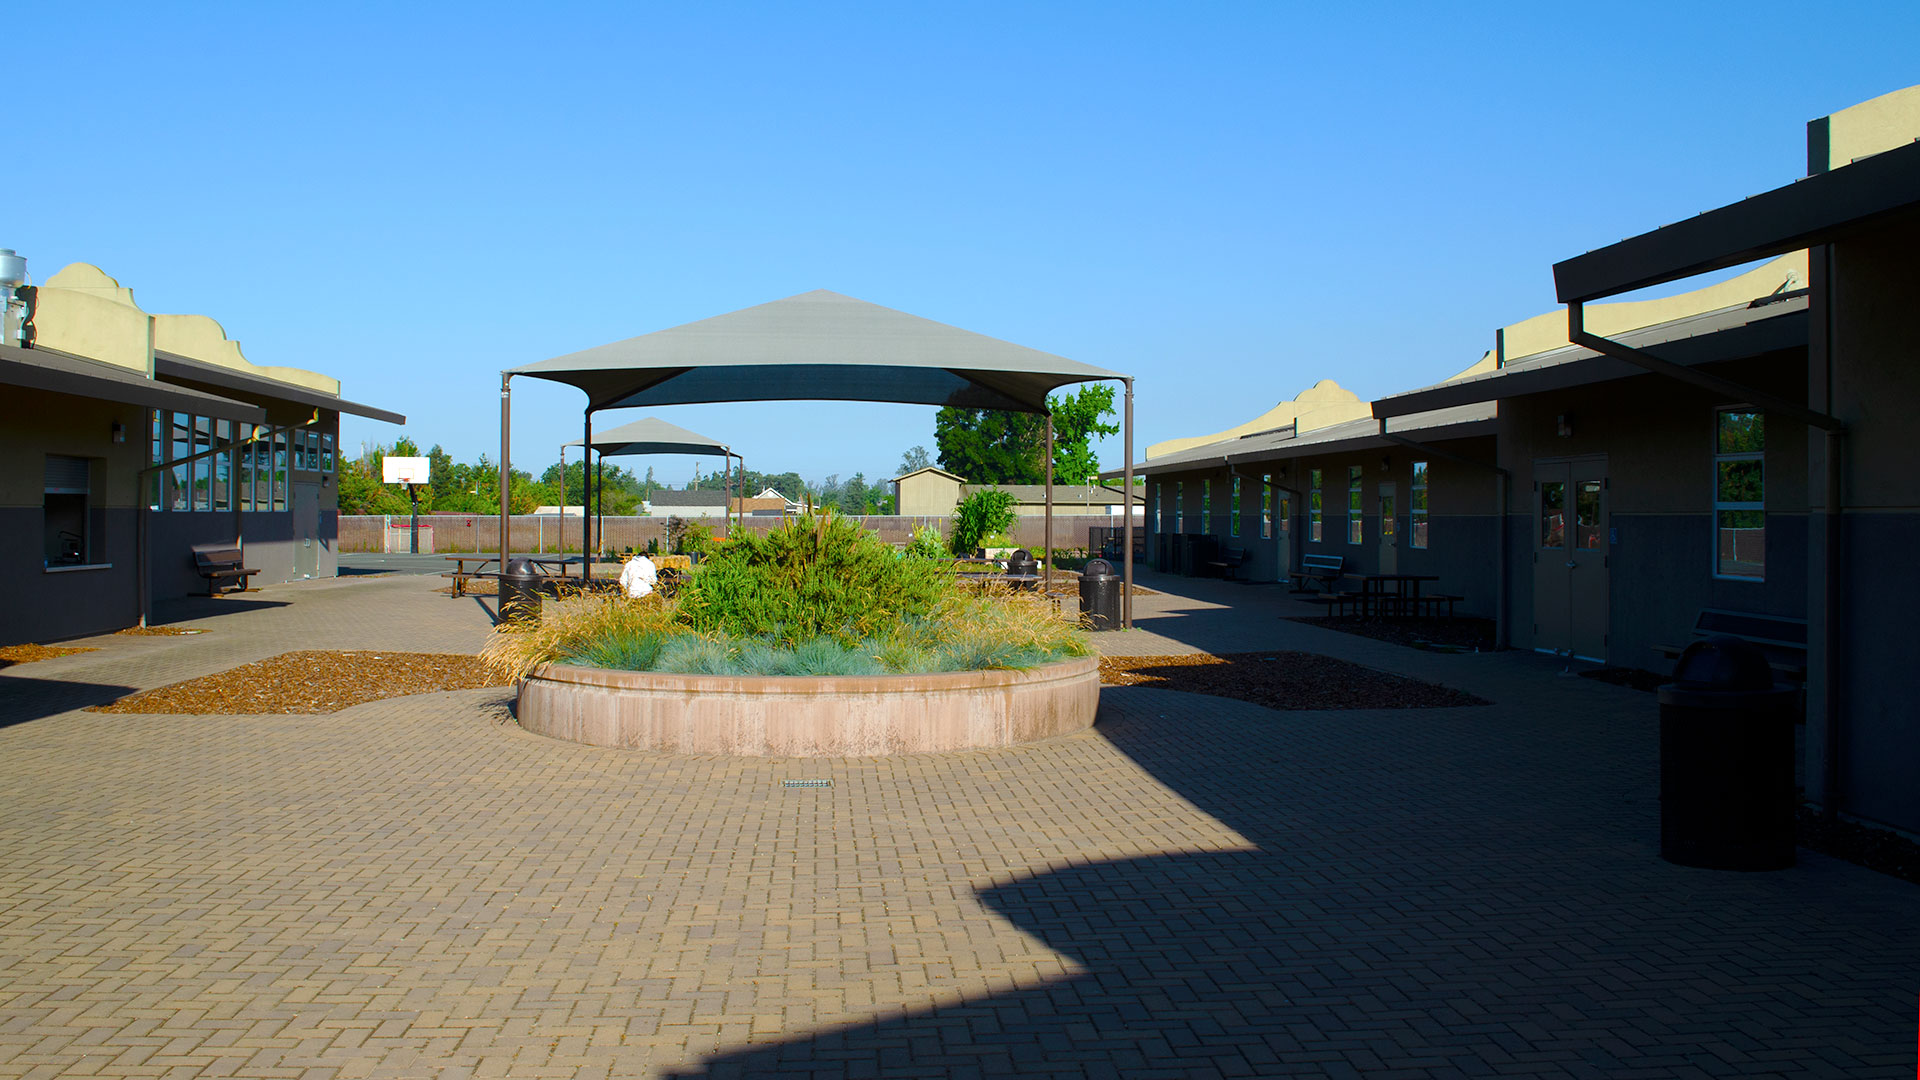 School courtyard with brick planter and seats. Shade structure in back over seating area.